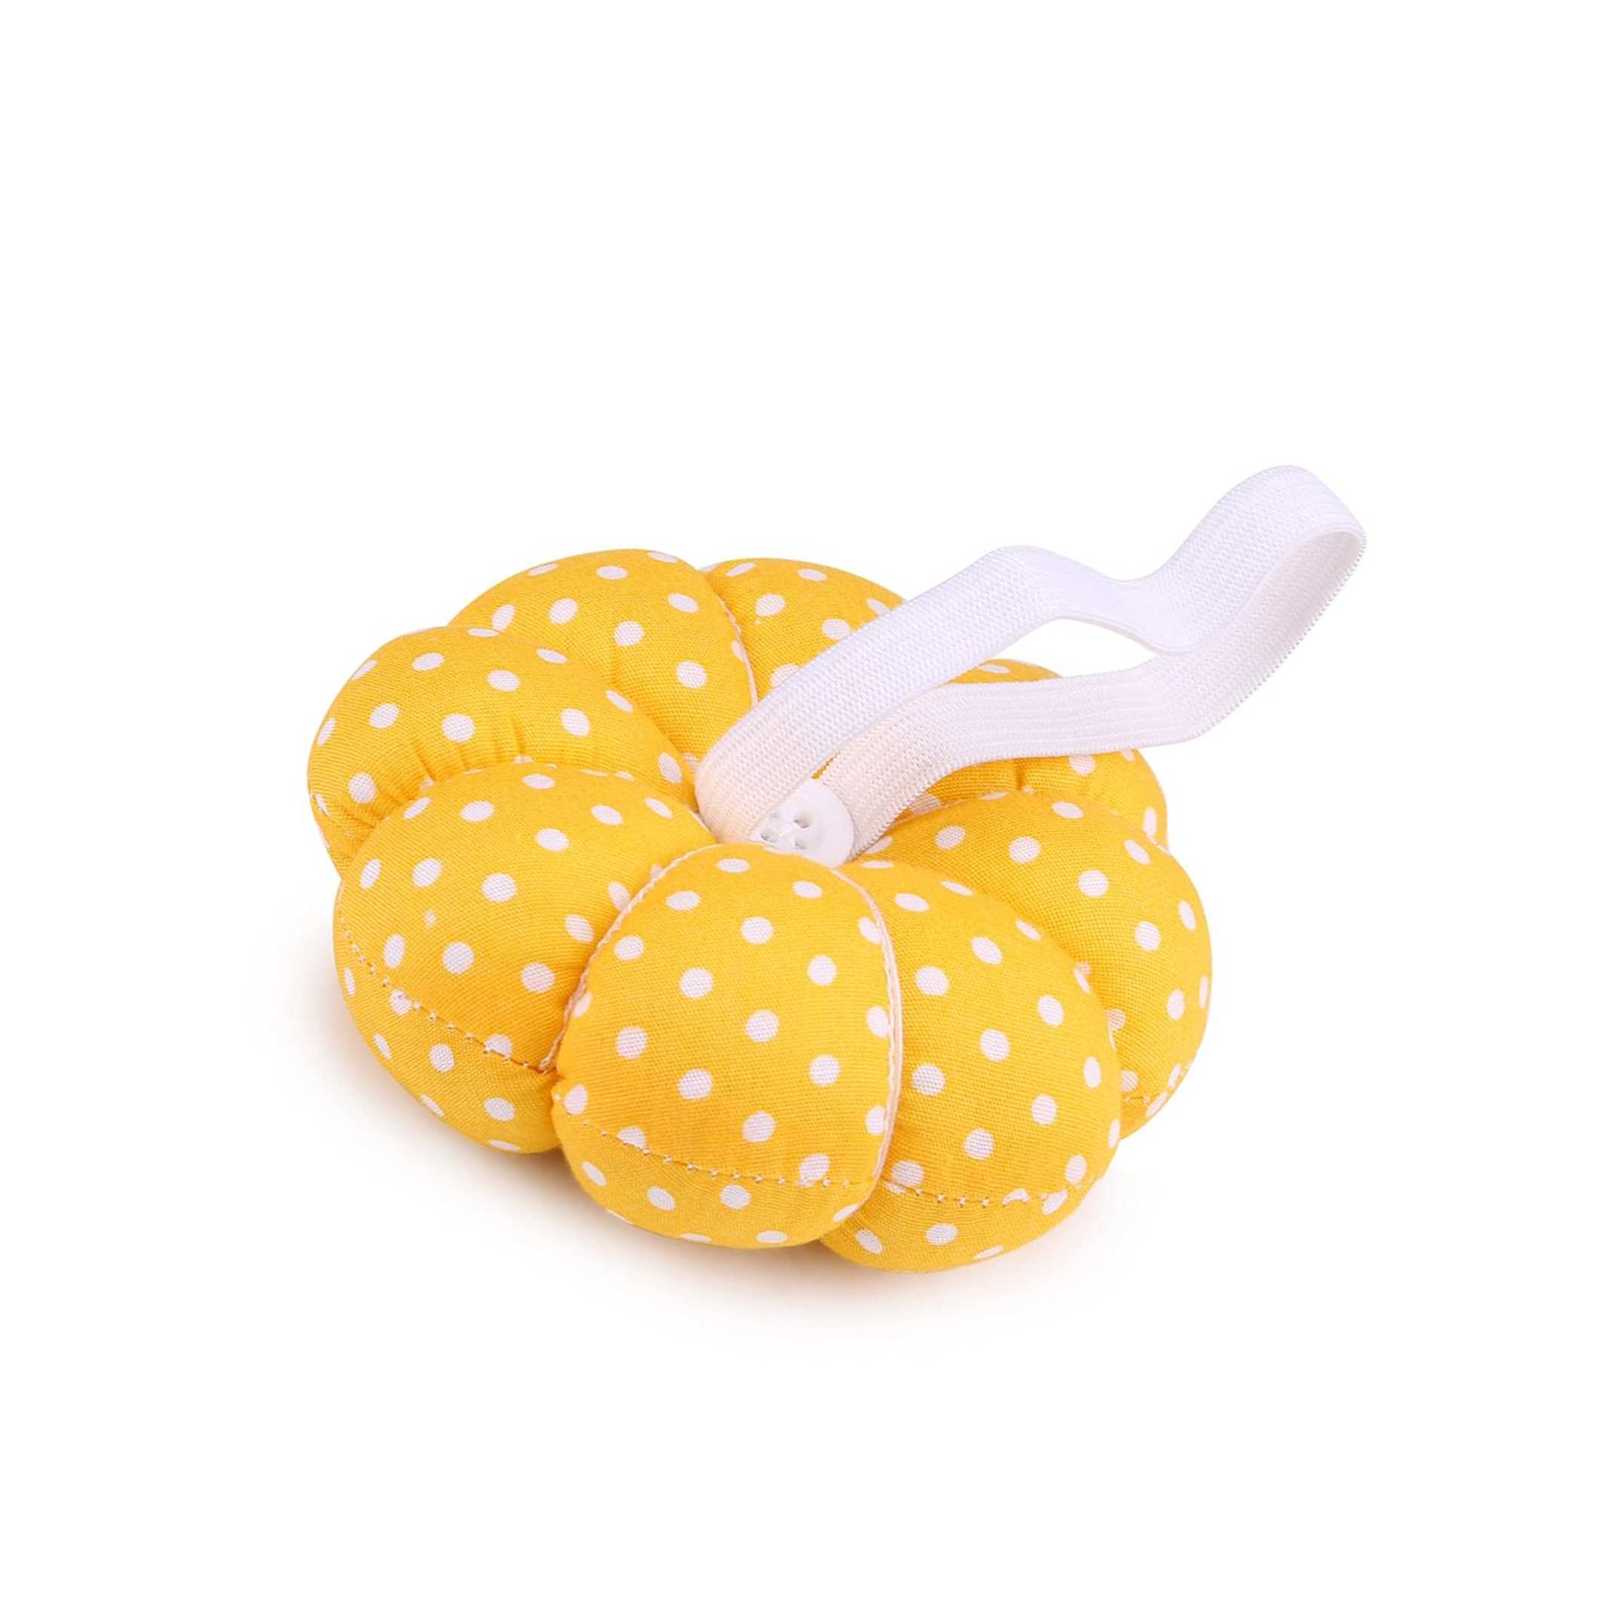 Epdj Products - Wrist pin cushion, kin wearable pin cushions with elastic for sewing work, po